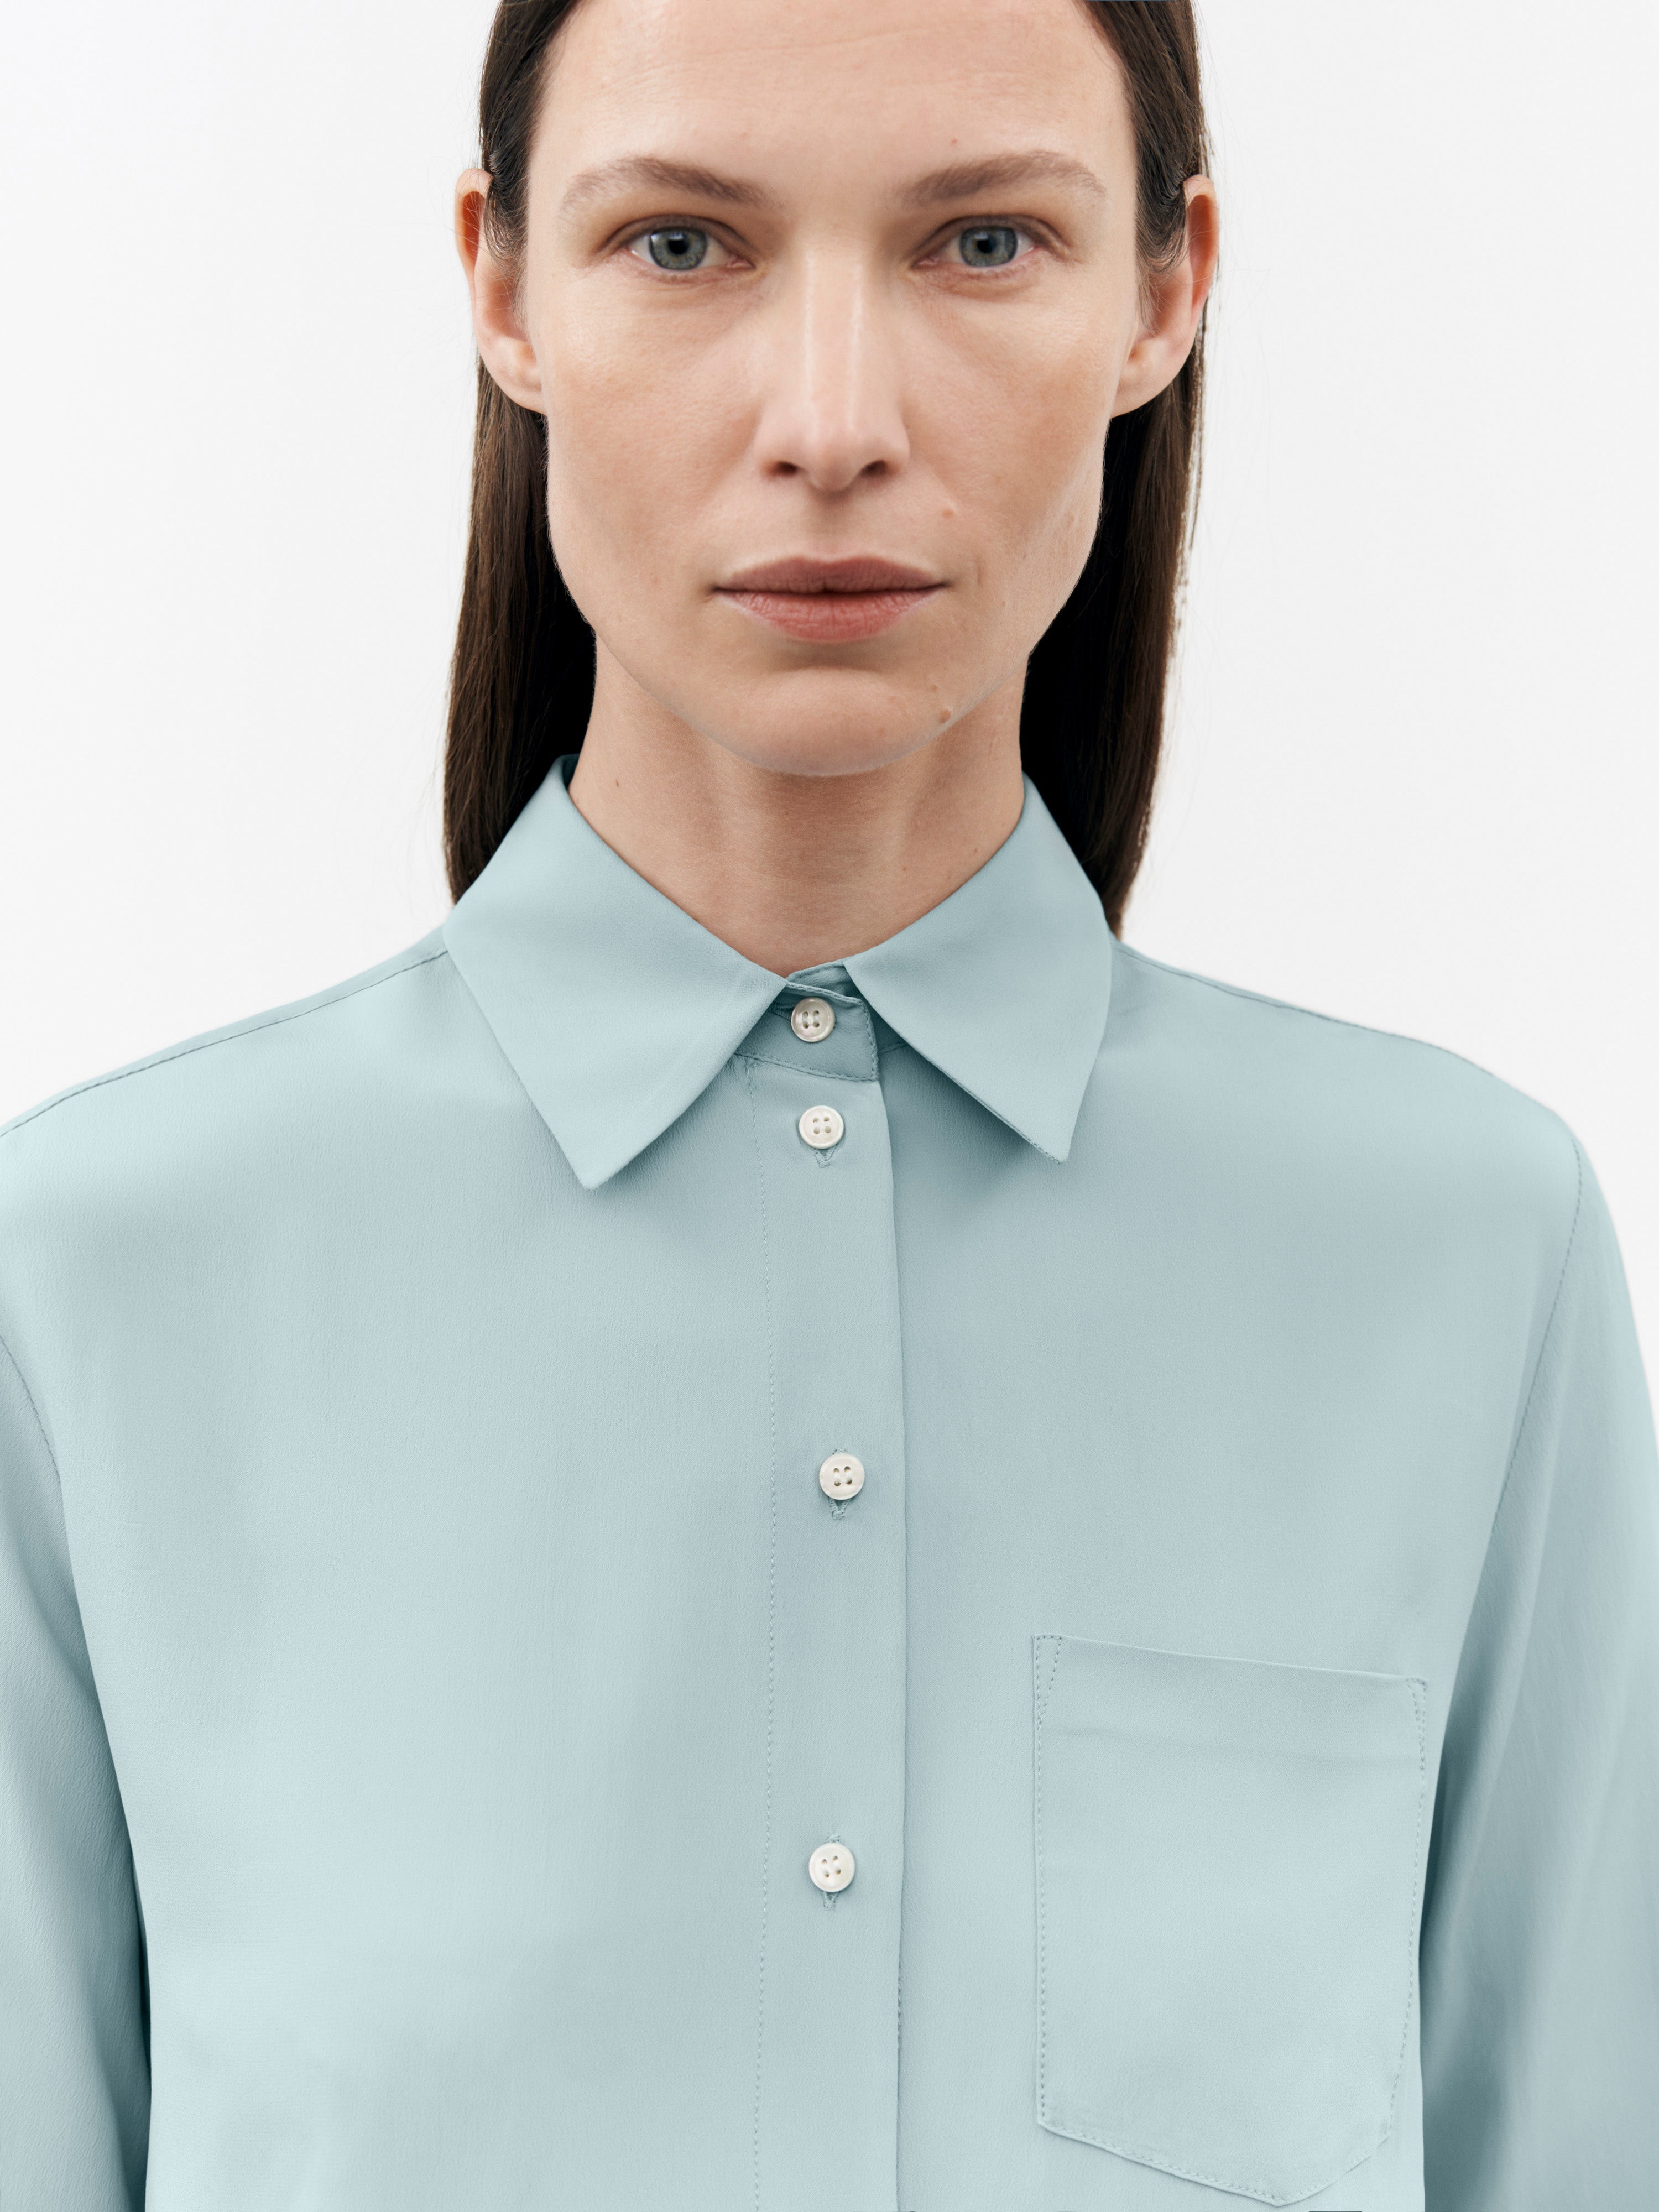 TIGER OF SWEDEN Celosa Shirt in Teal S71217013 | eightywingold 